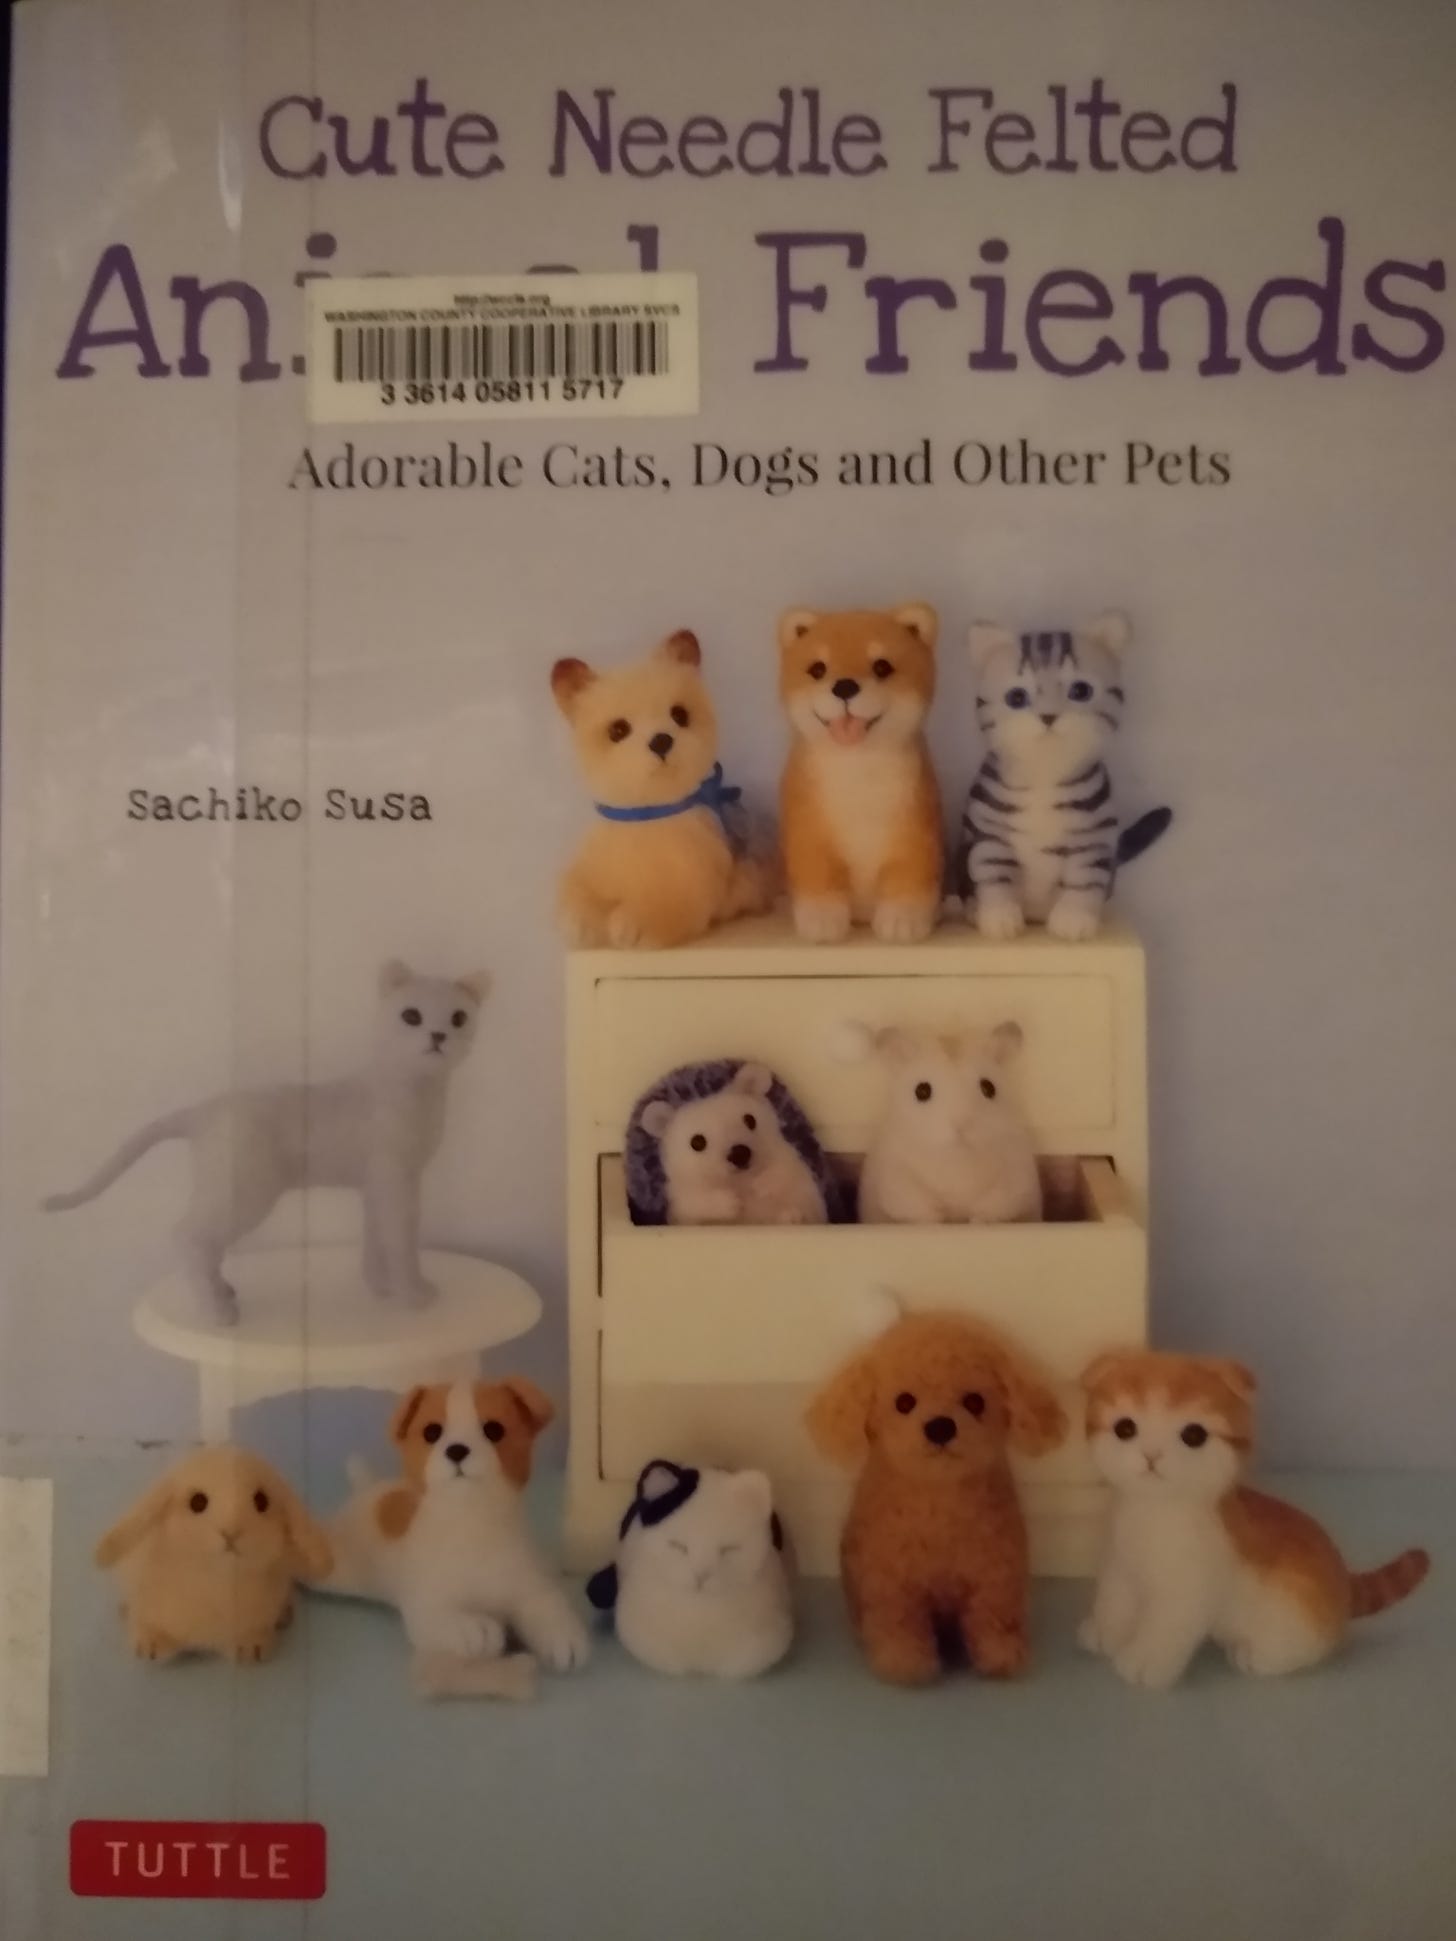 Picture of book cover, titled Cute Needle Felted Animal Friends: Adorable Cats, Dogs and Other Pets by Sachiko Susa